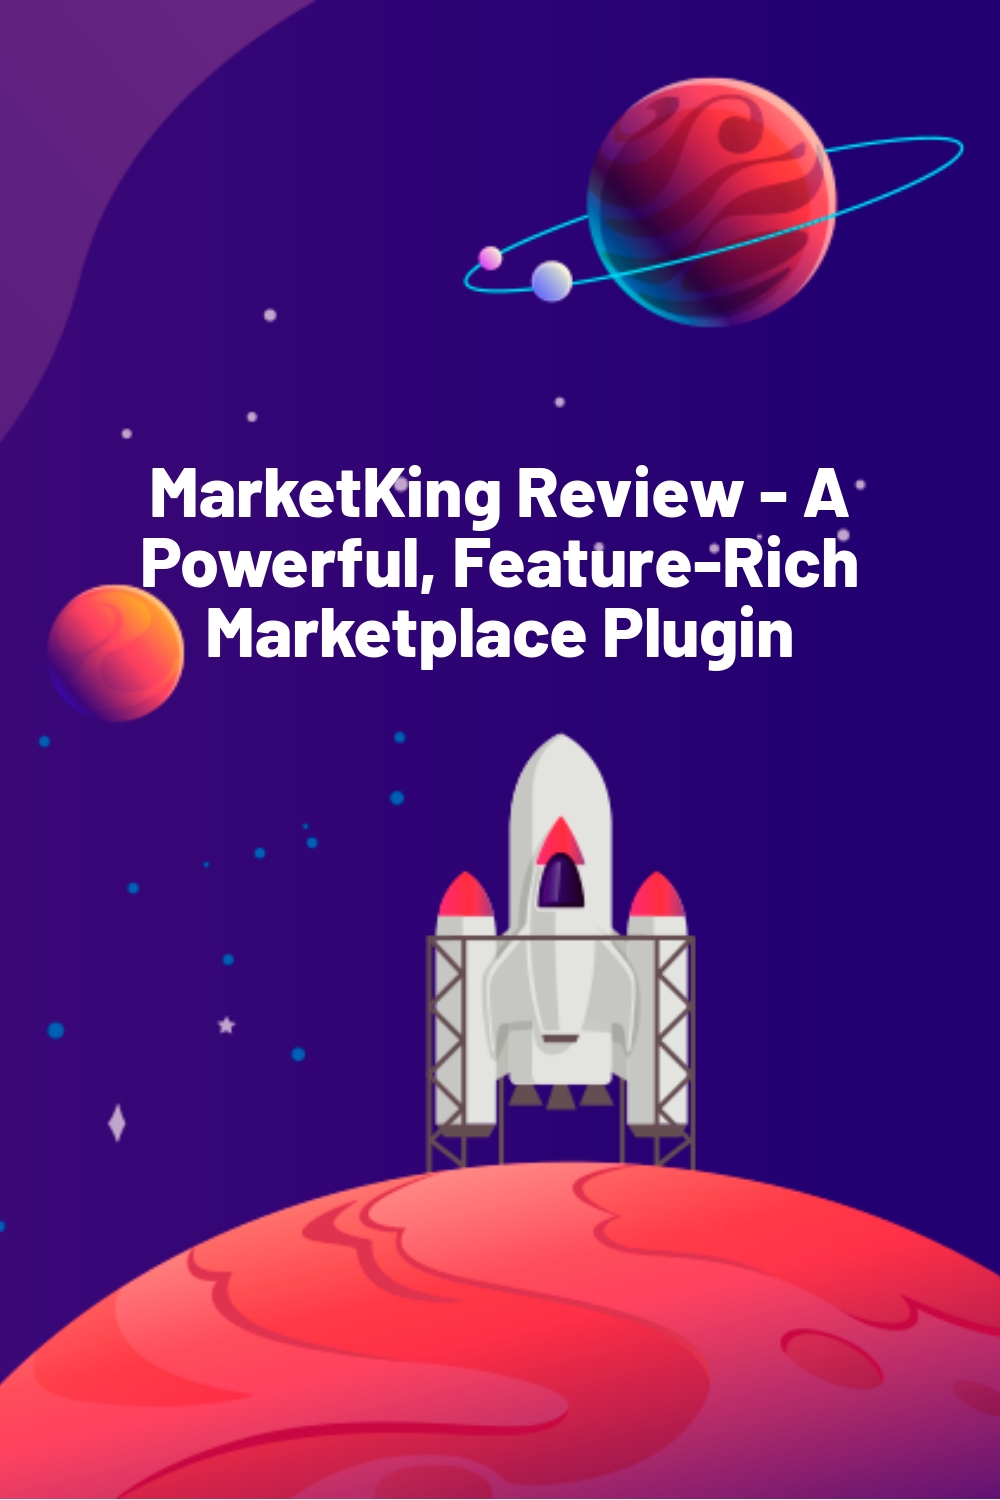 MarketKing Review – A Powerful, Feature-Rich Marketplace Plugin